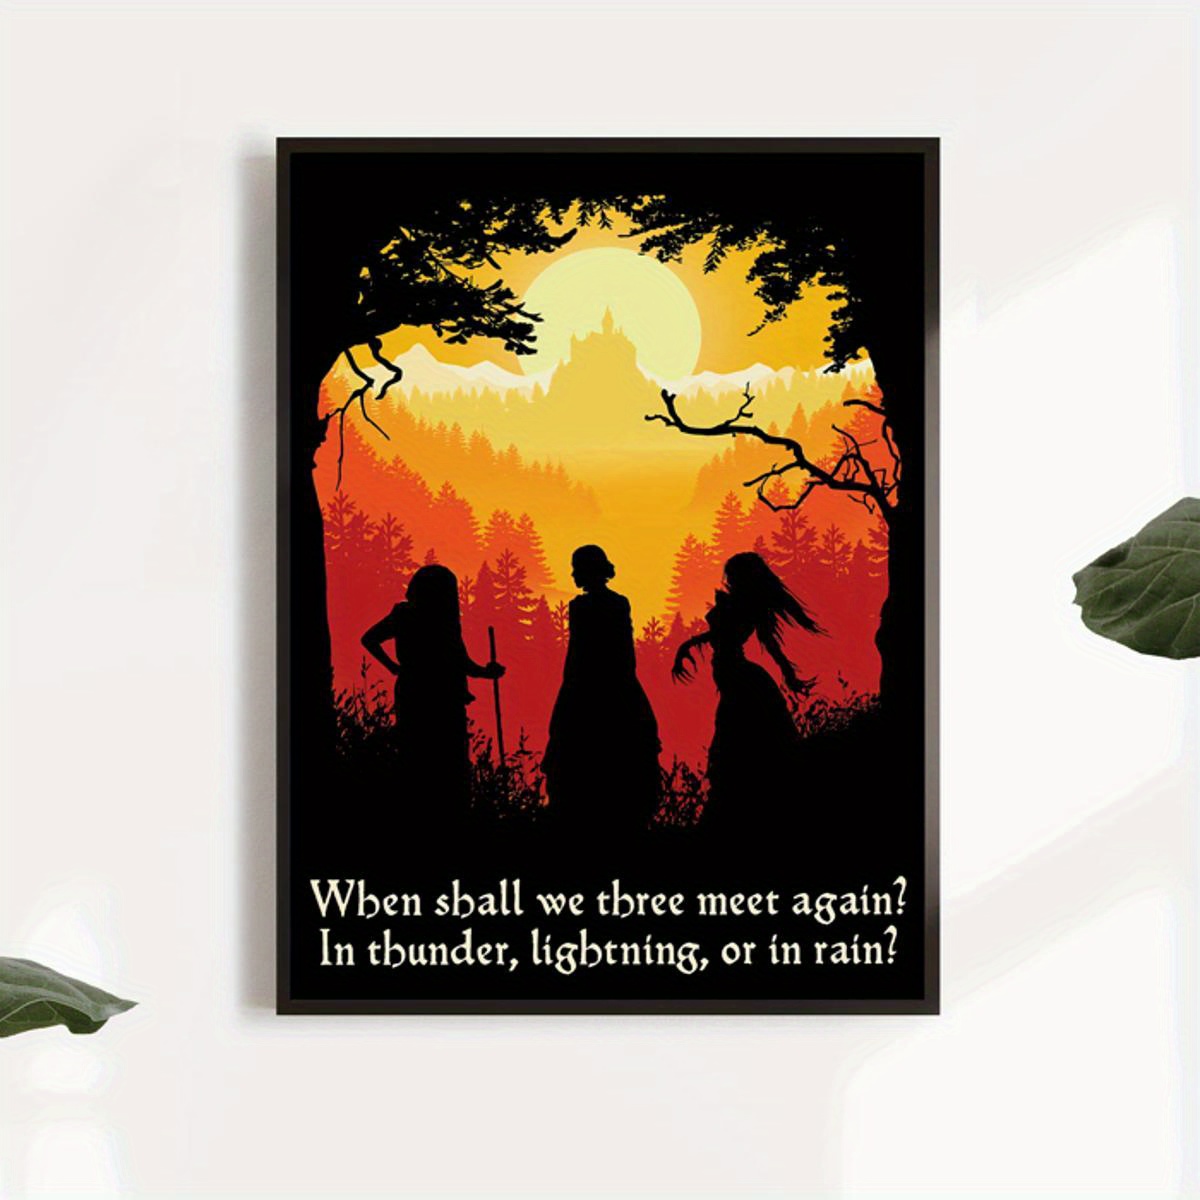 Shakespeare / Macbeth For sale as Framed Prints, Photos, Wall Art and Photo  Gifts